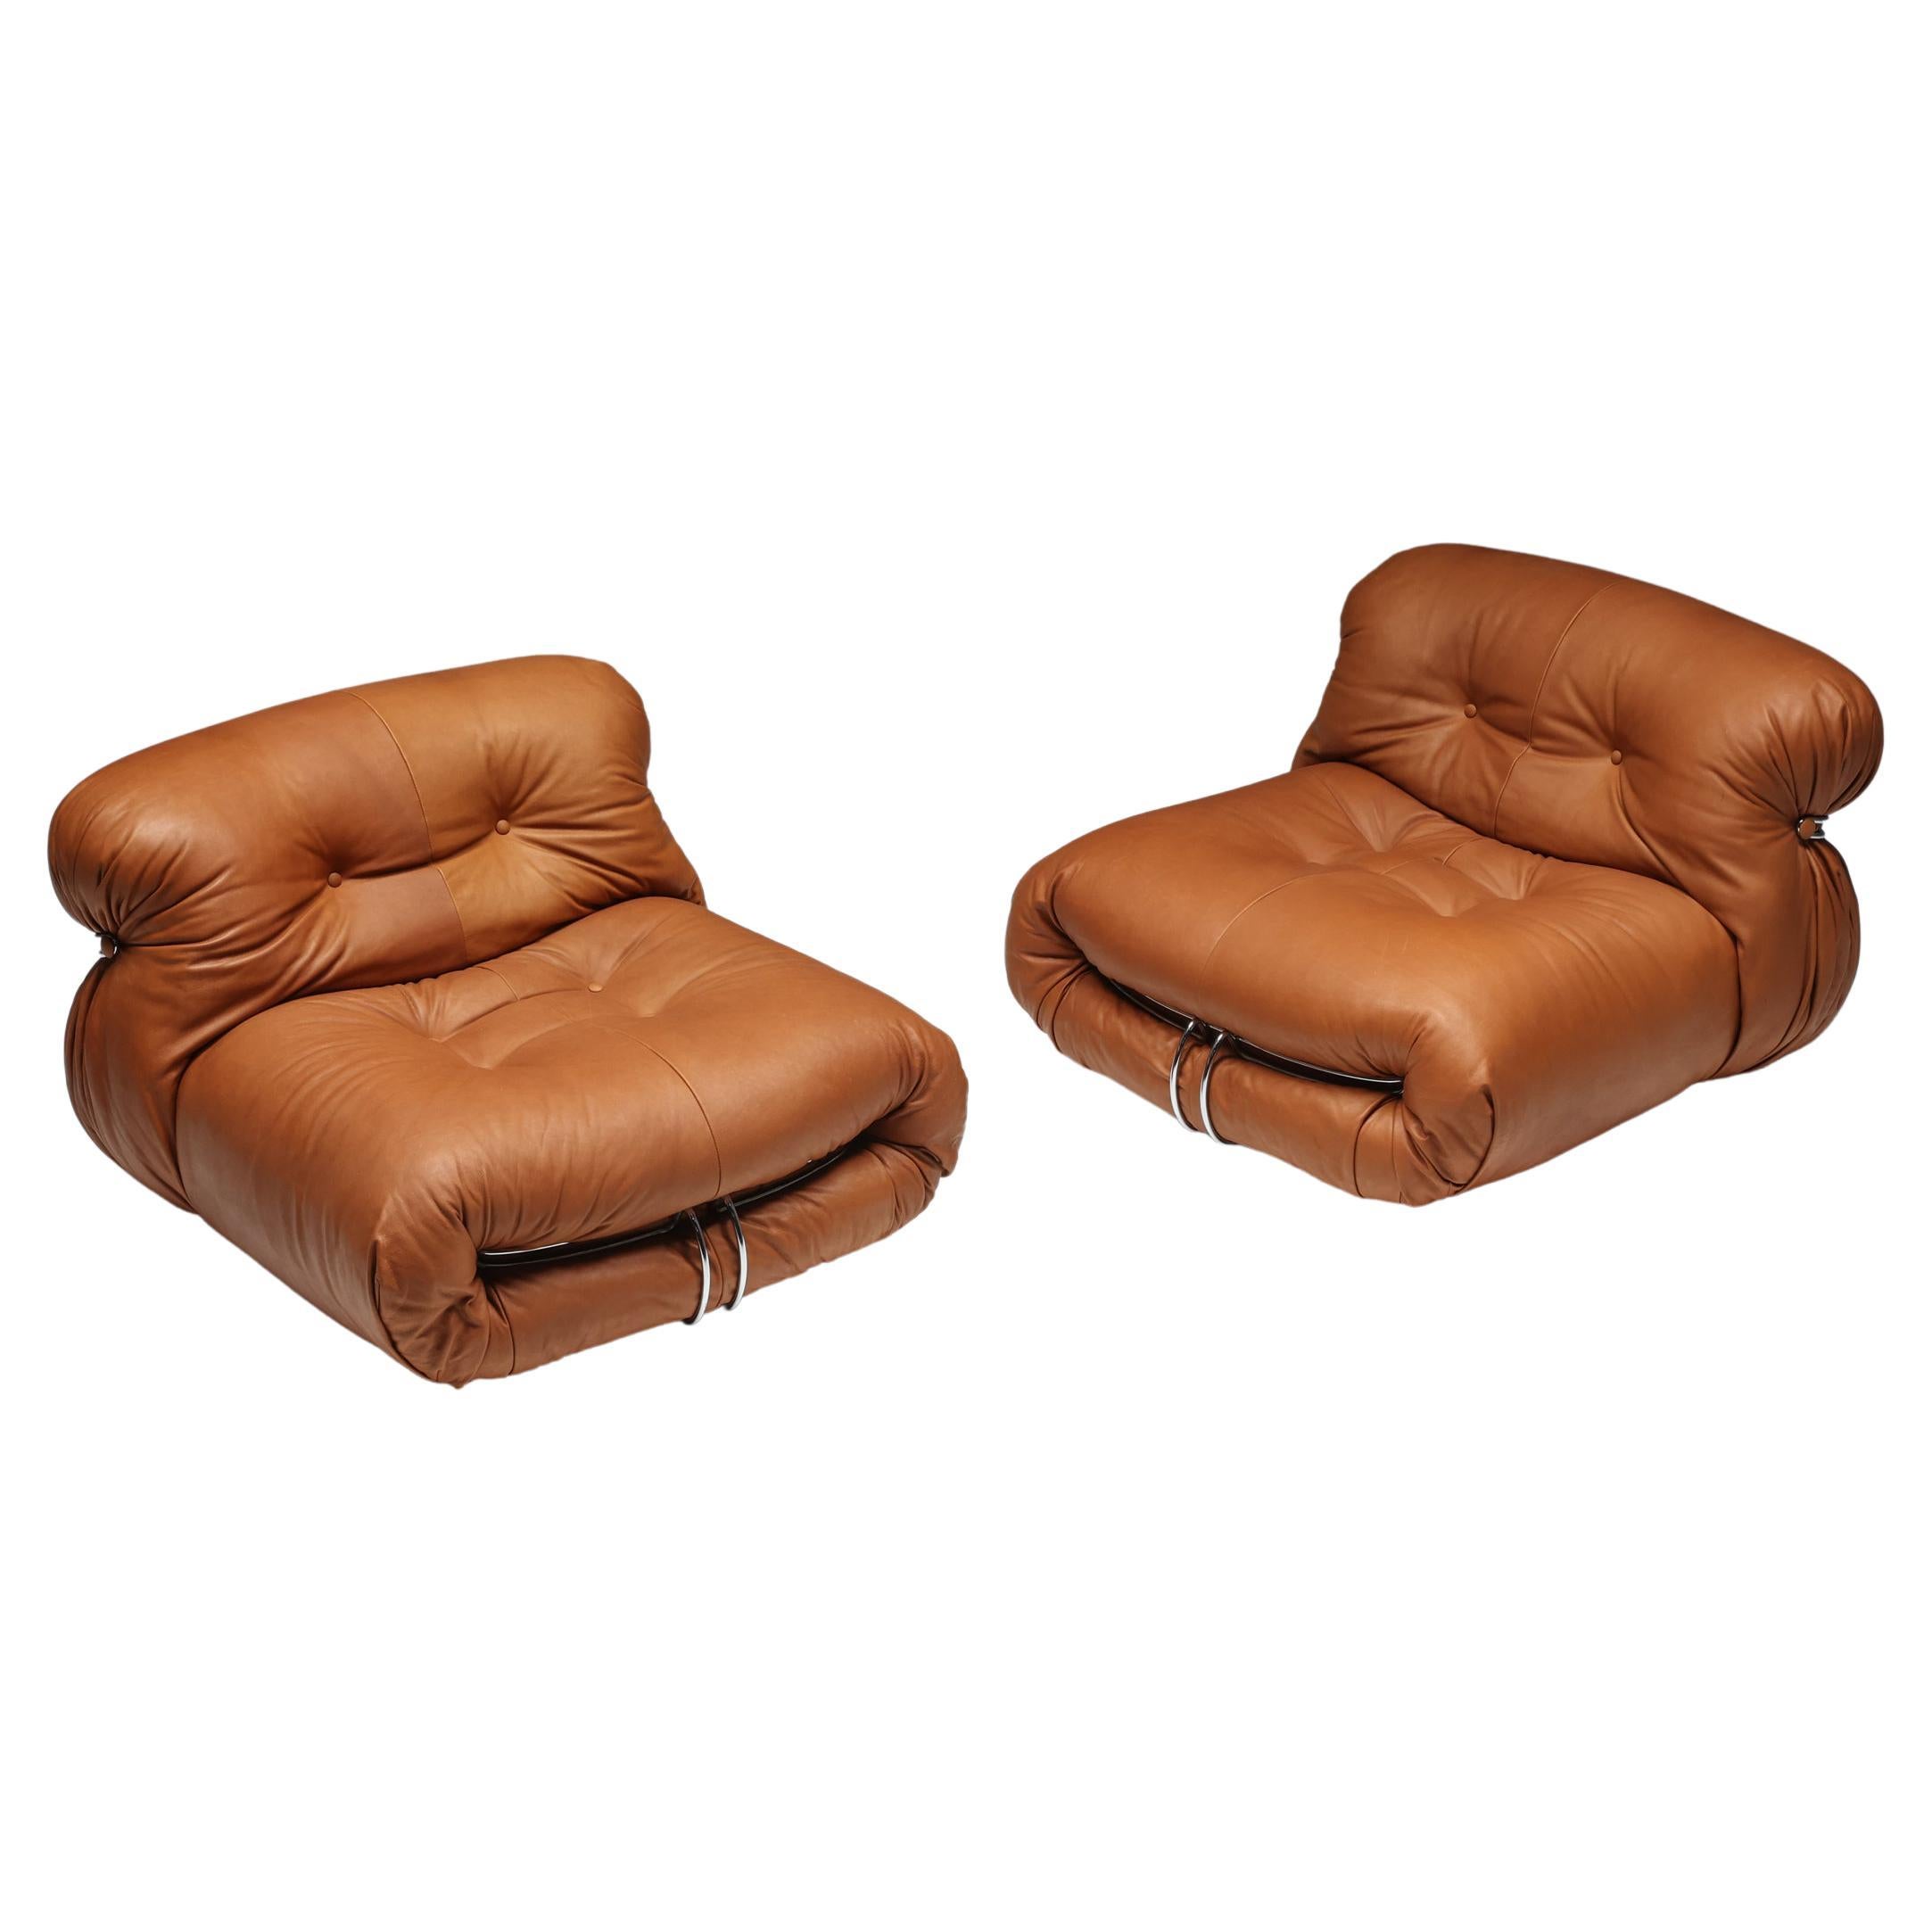 Afra and Tobia Scarpa for Cassina 'Soriana' Pair of Lounge Chairs, 1970's